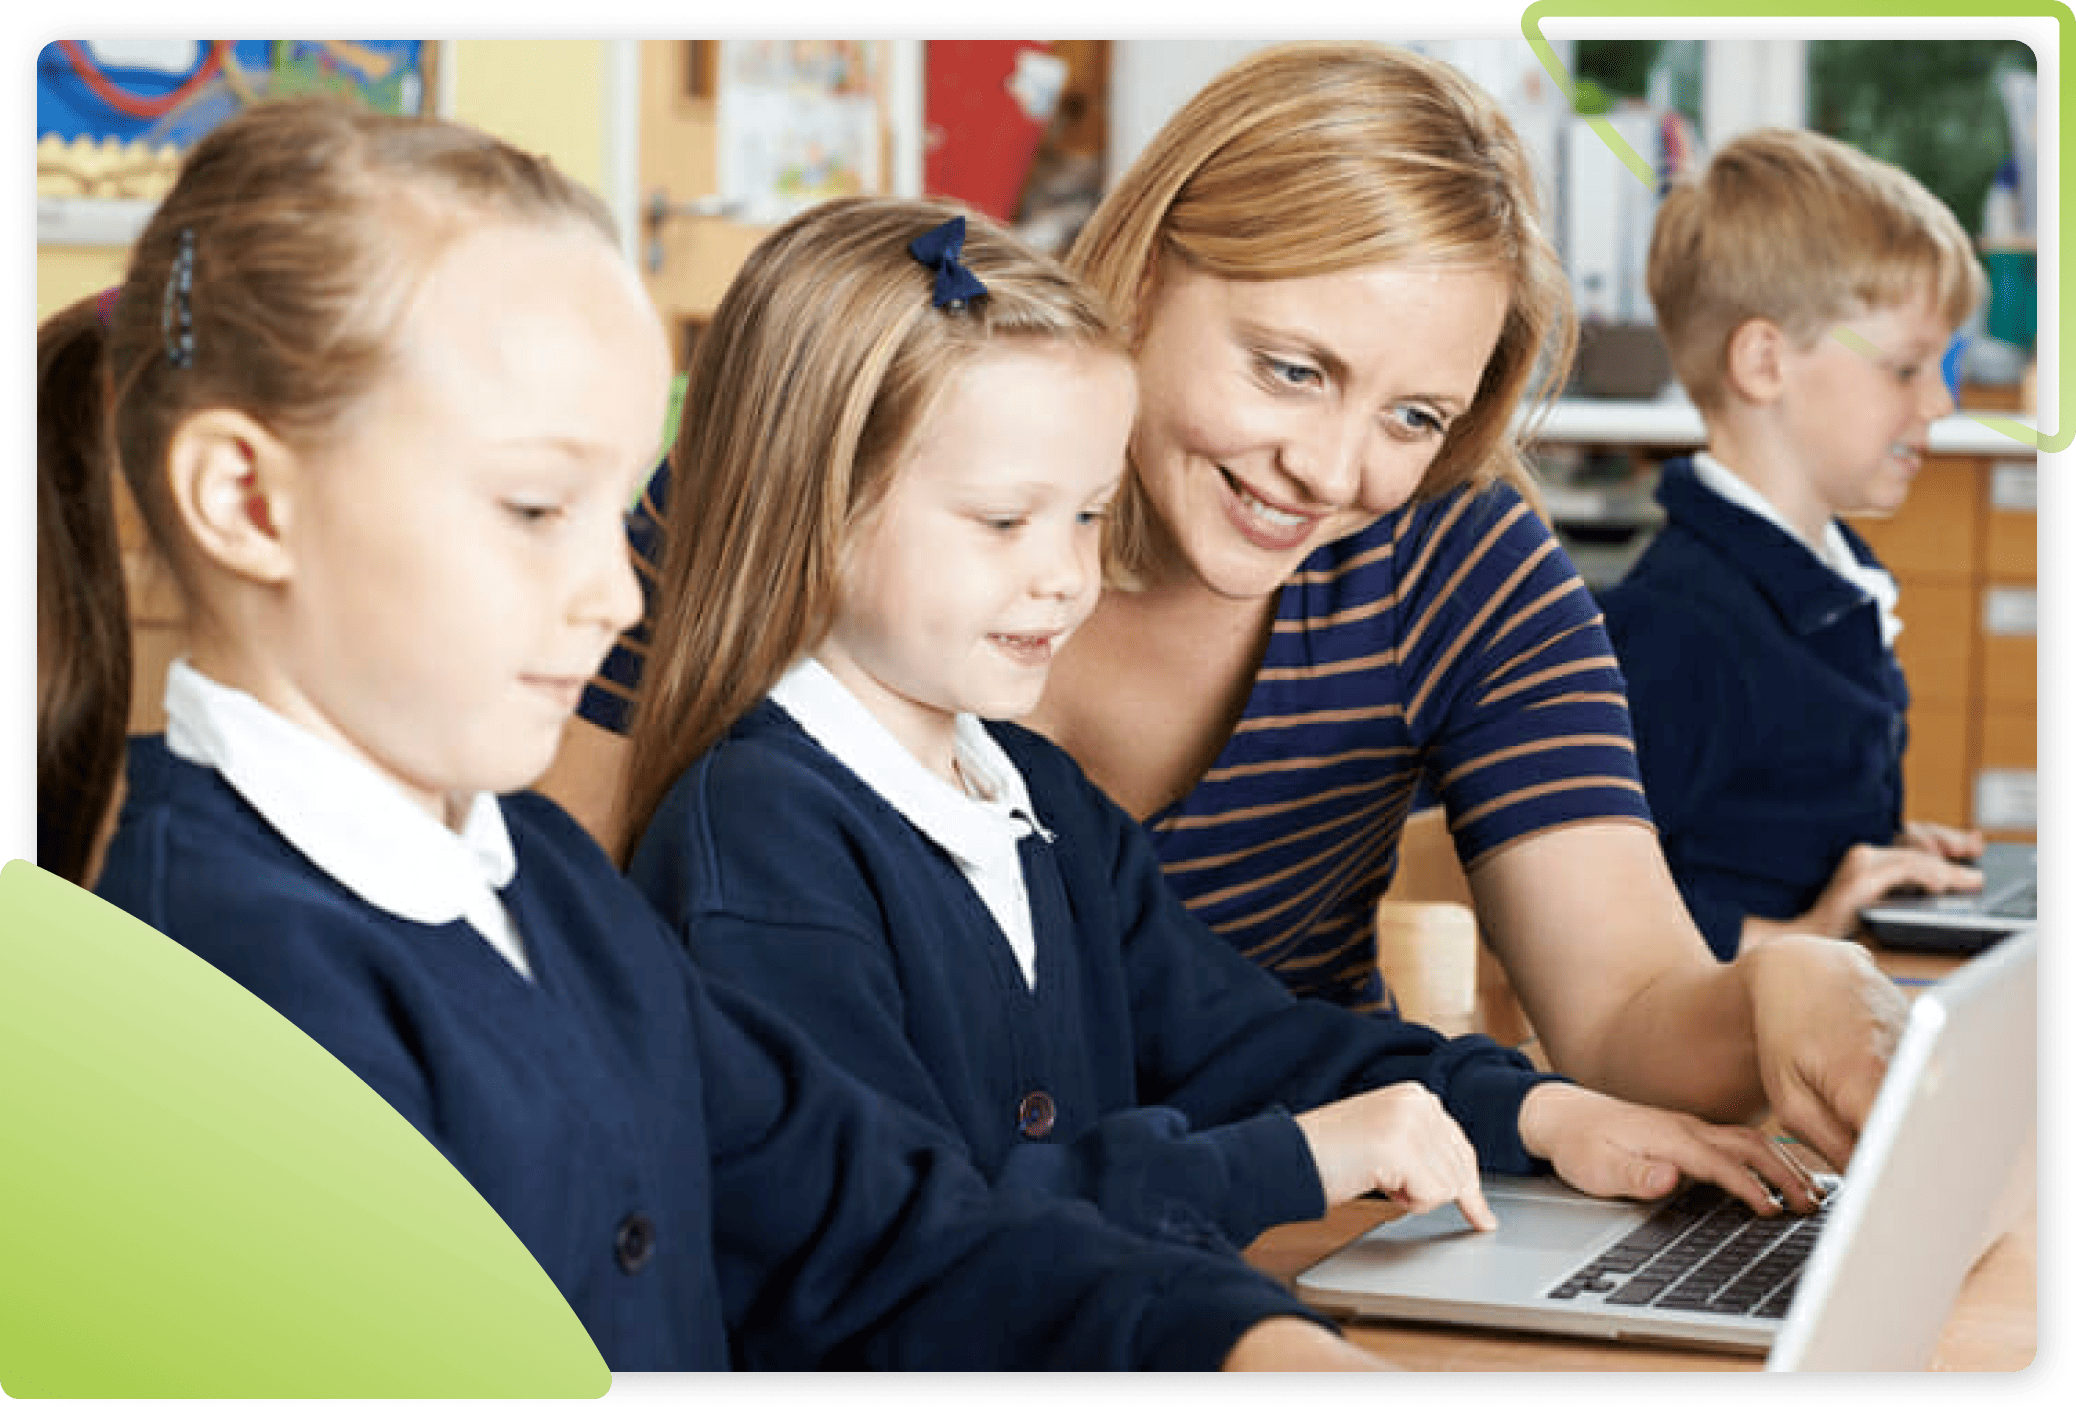 schools payroll, payroll software for schools, payroll services for schools, payroll for education